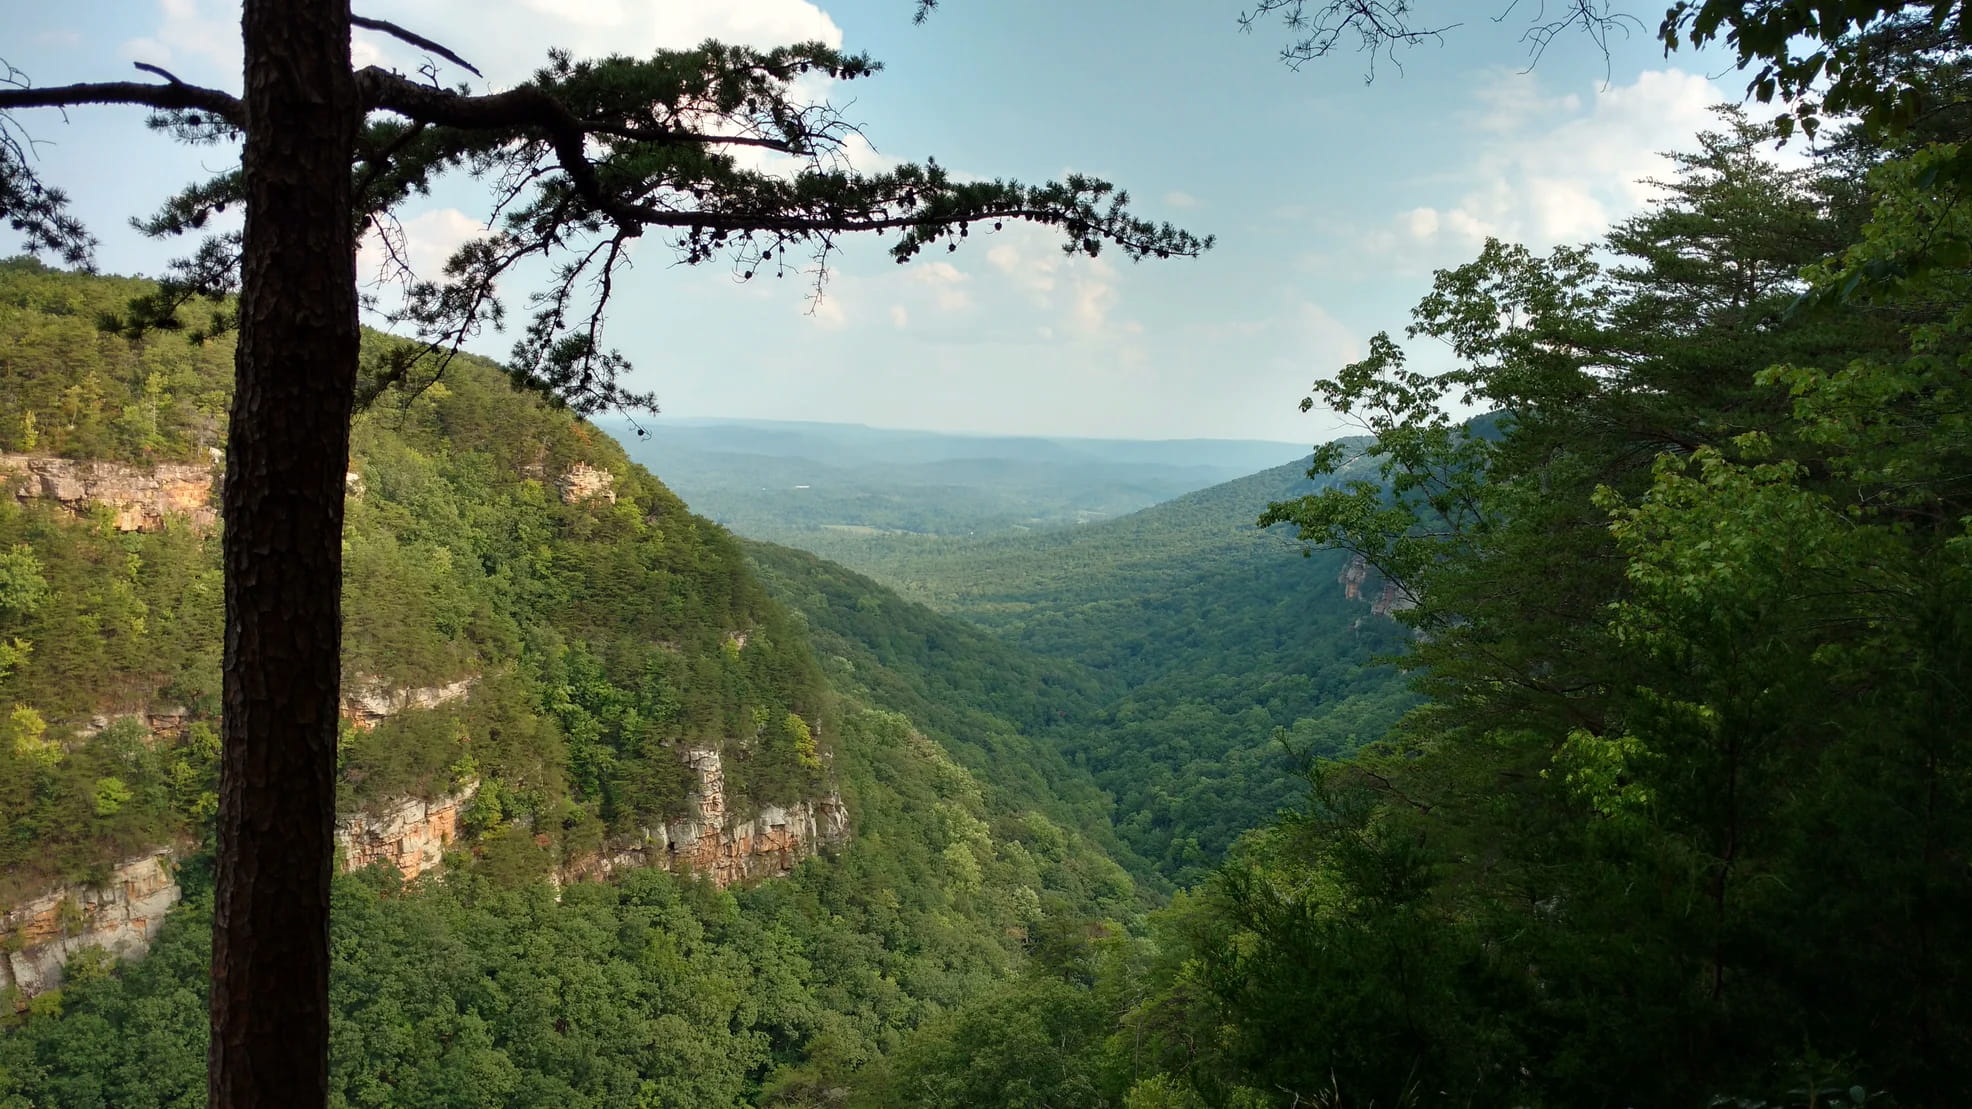 View from the top of cloudland canyon over looking rocky cliffs and forested valley below.